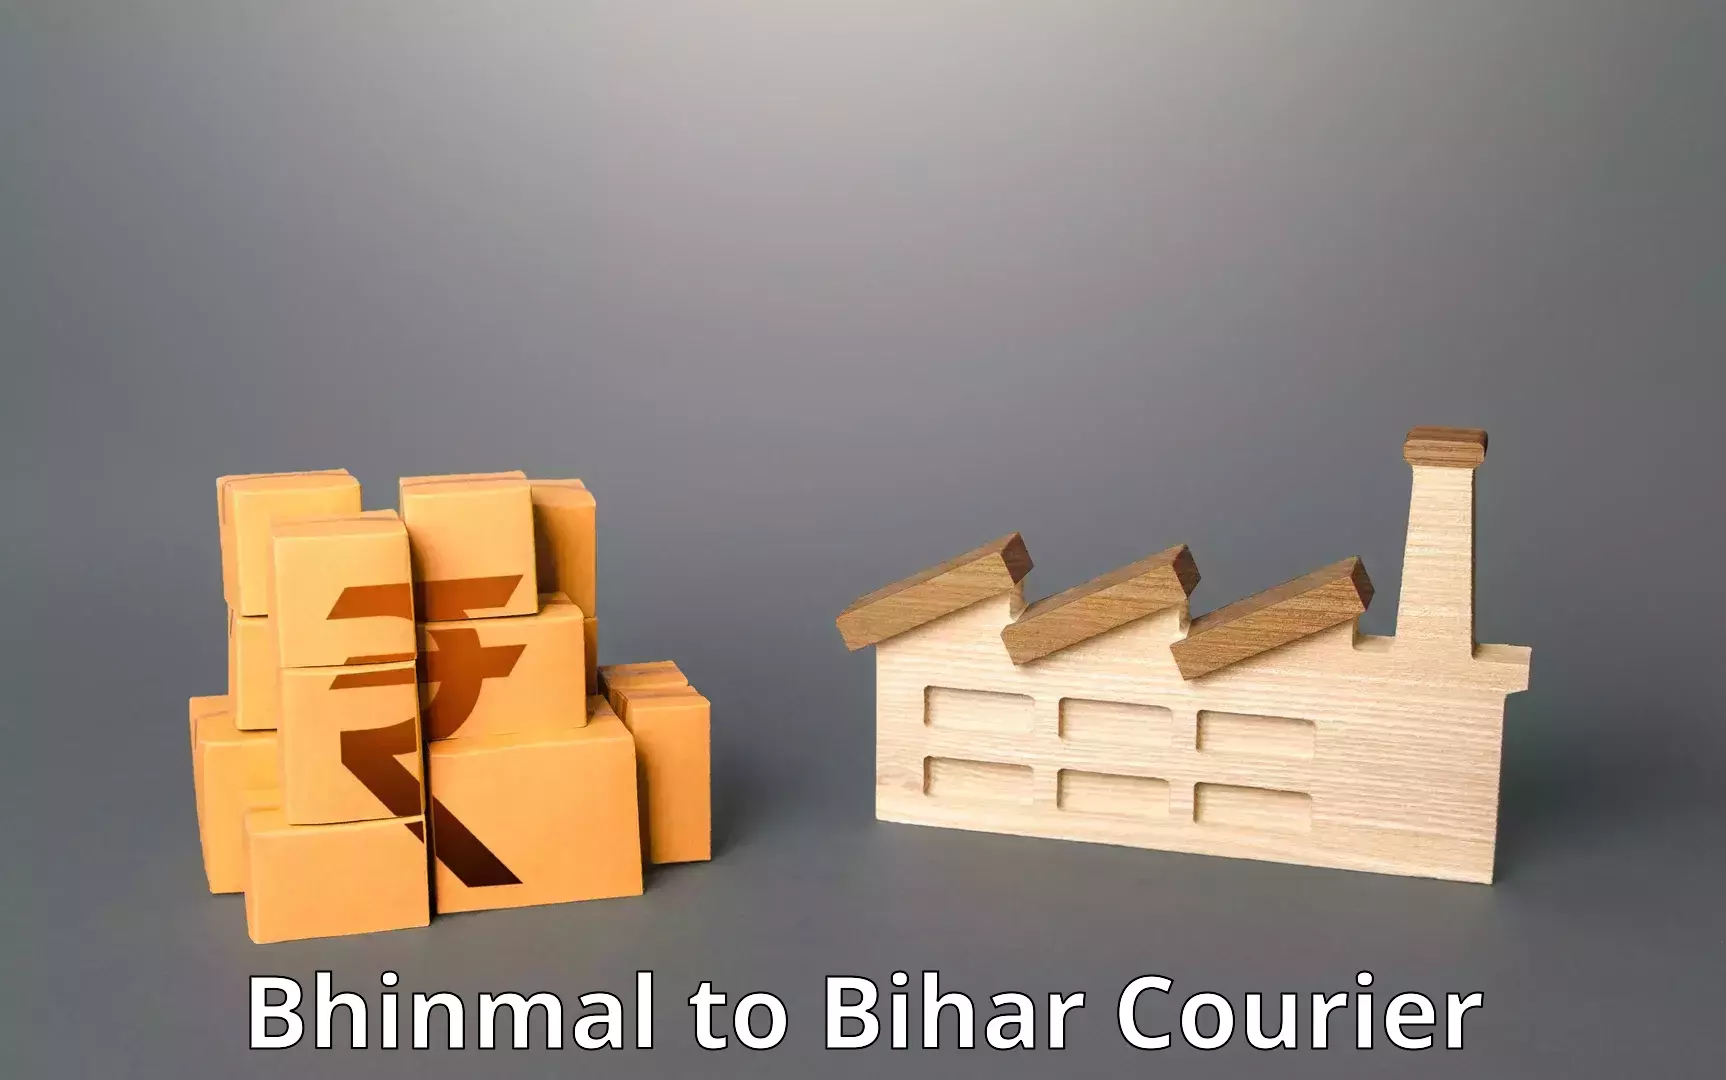 Package delivery network Bhinmal to Bihar